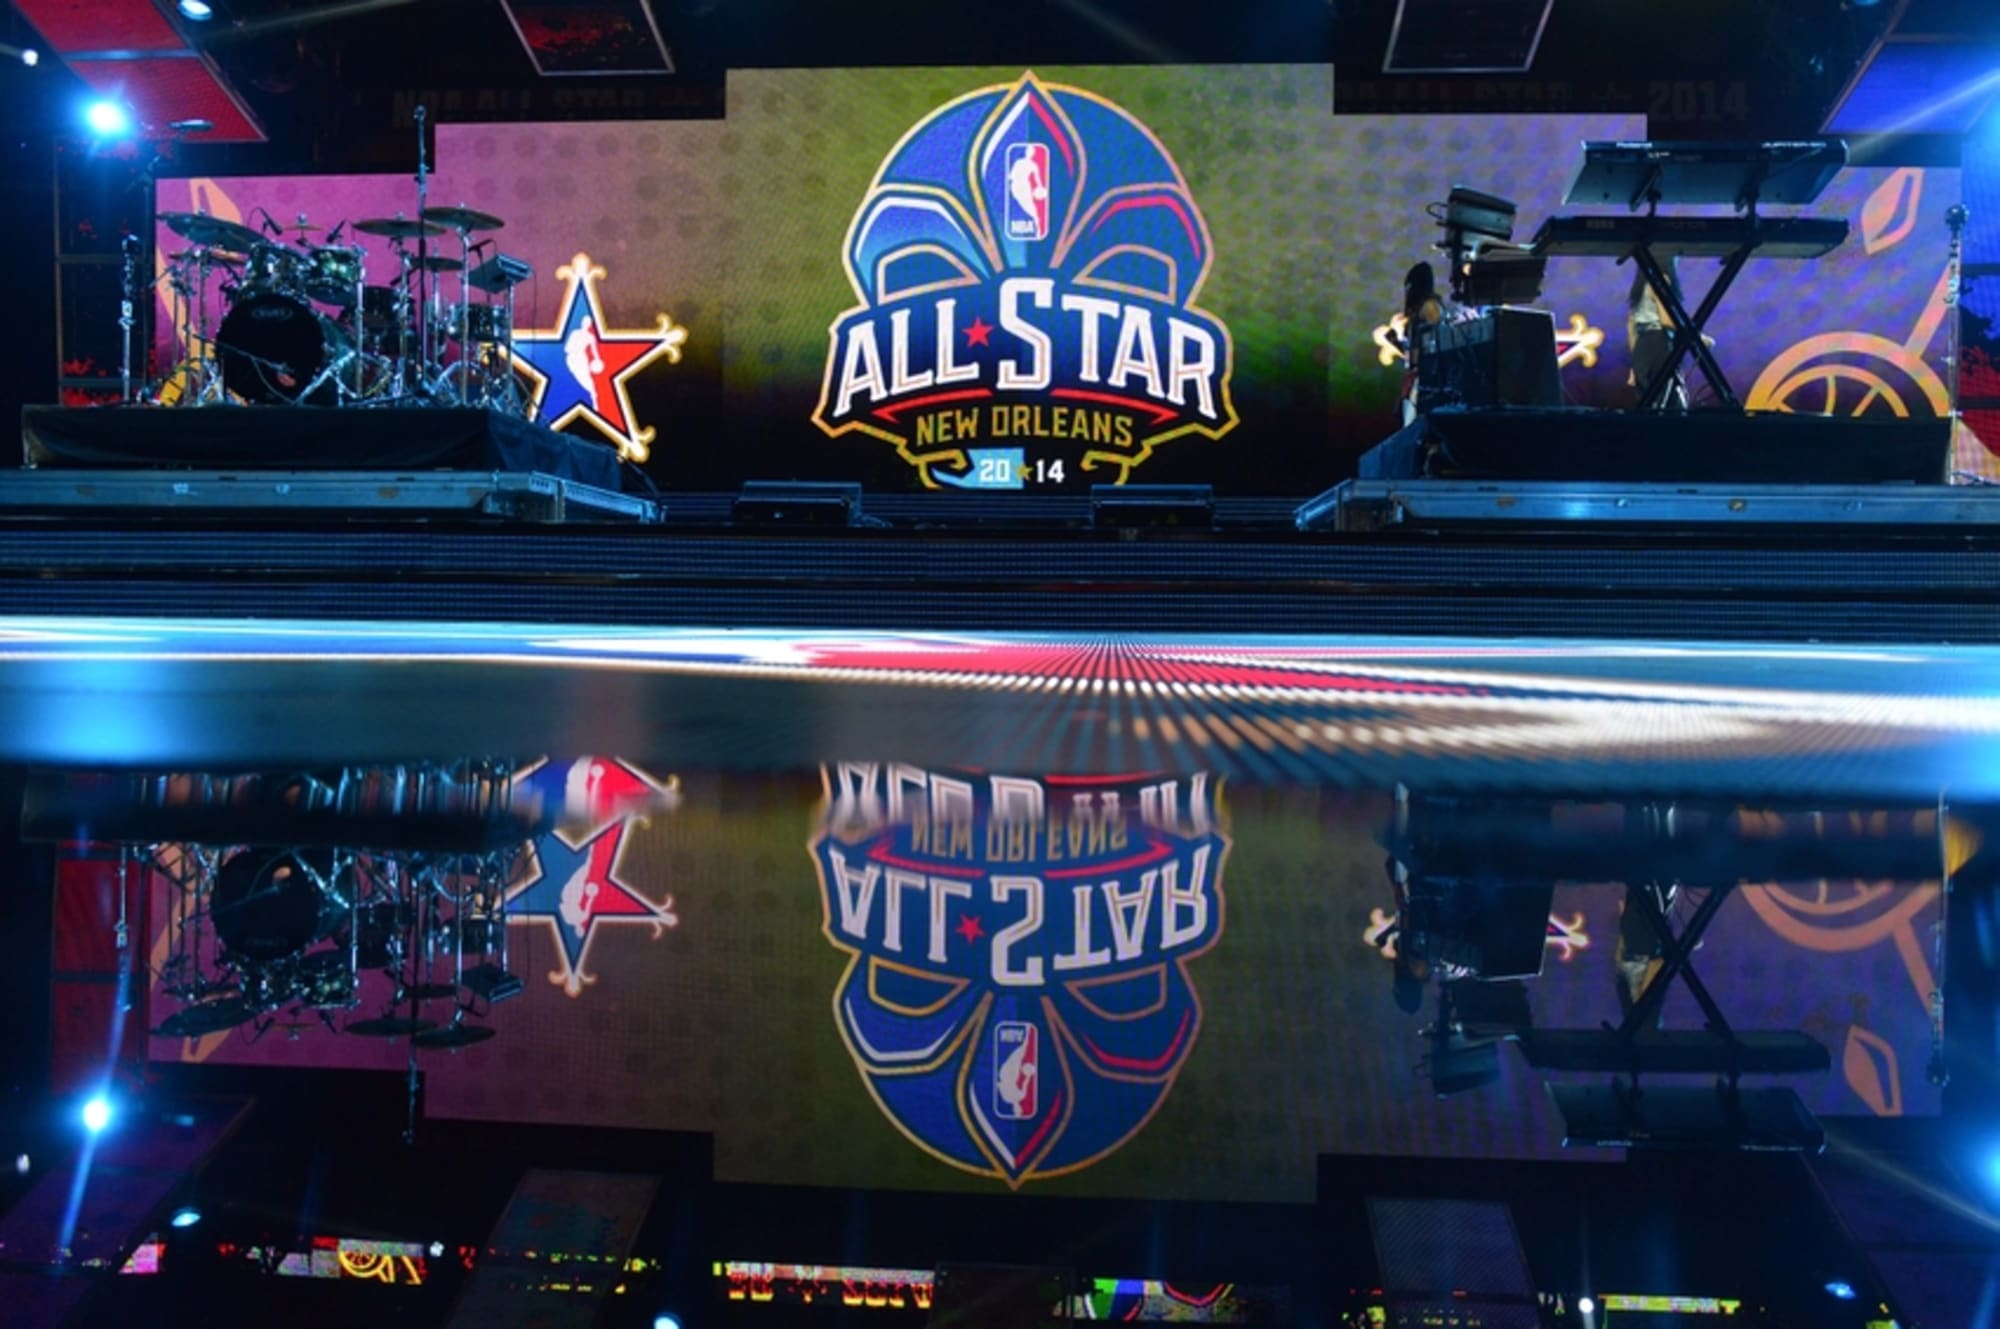 The 12-player NBA All-Star rosters are a relic of the '50s. Let's